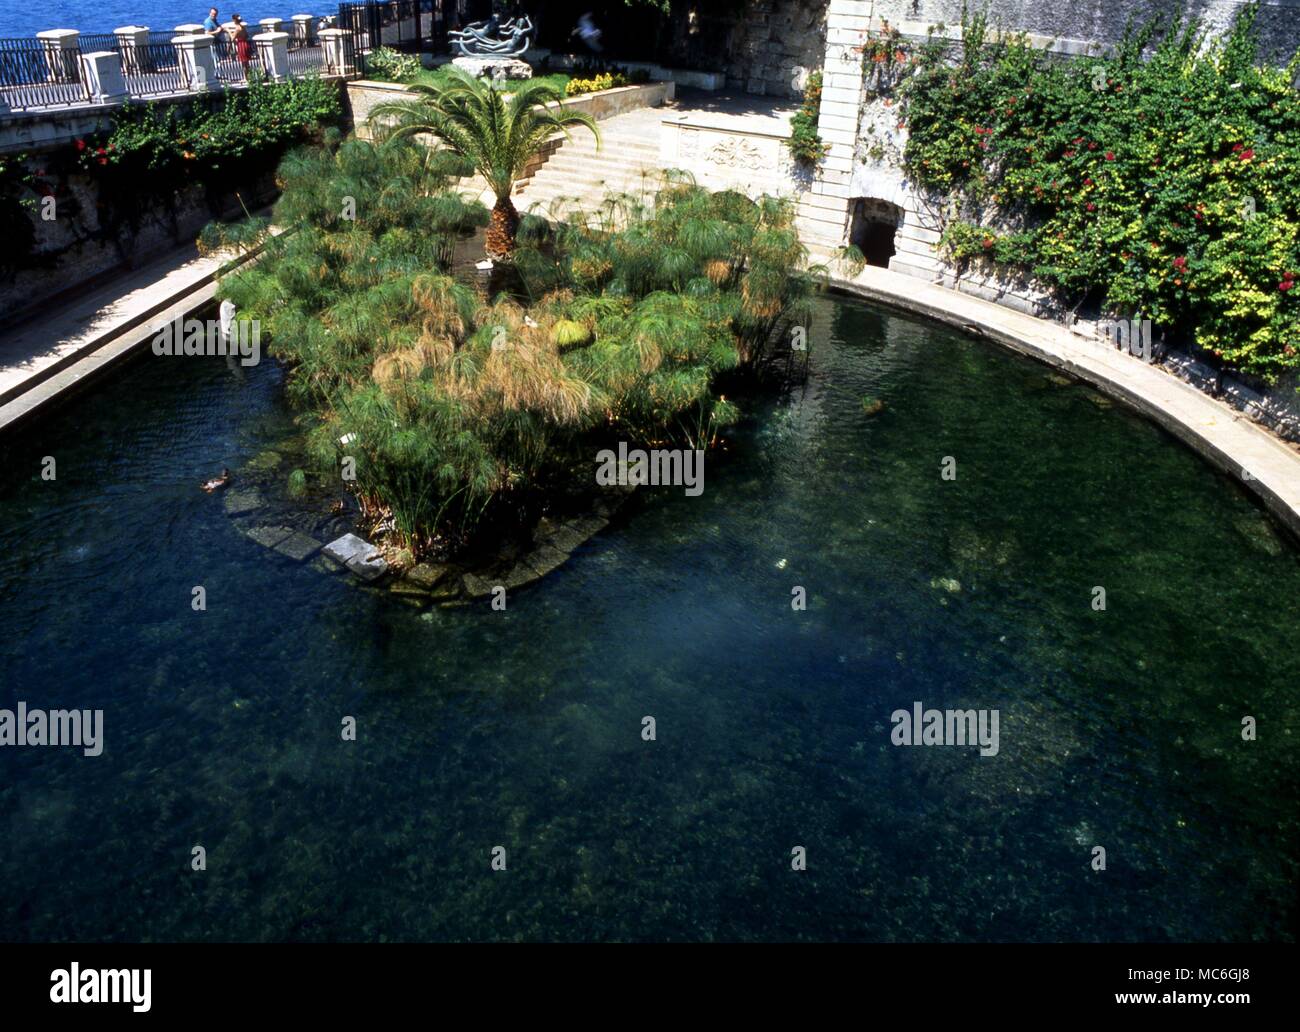 The sacred well or spring of Arethusa, mentioned in the songs of Virgil and Pindar. Stock Photo